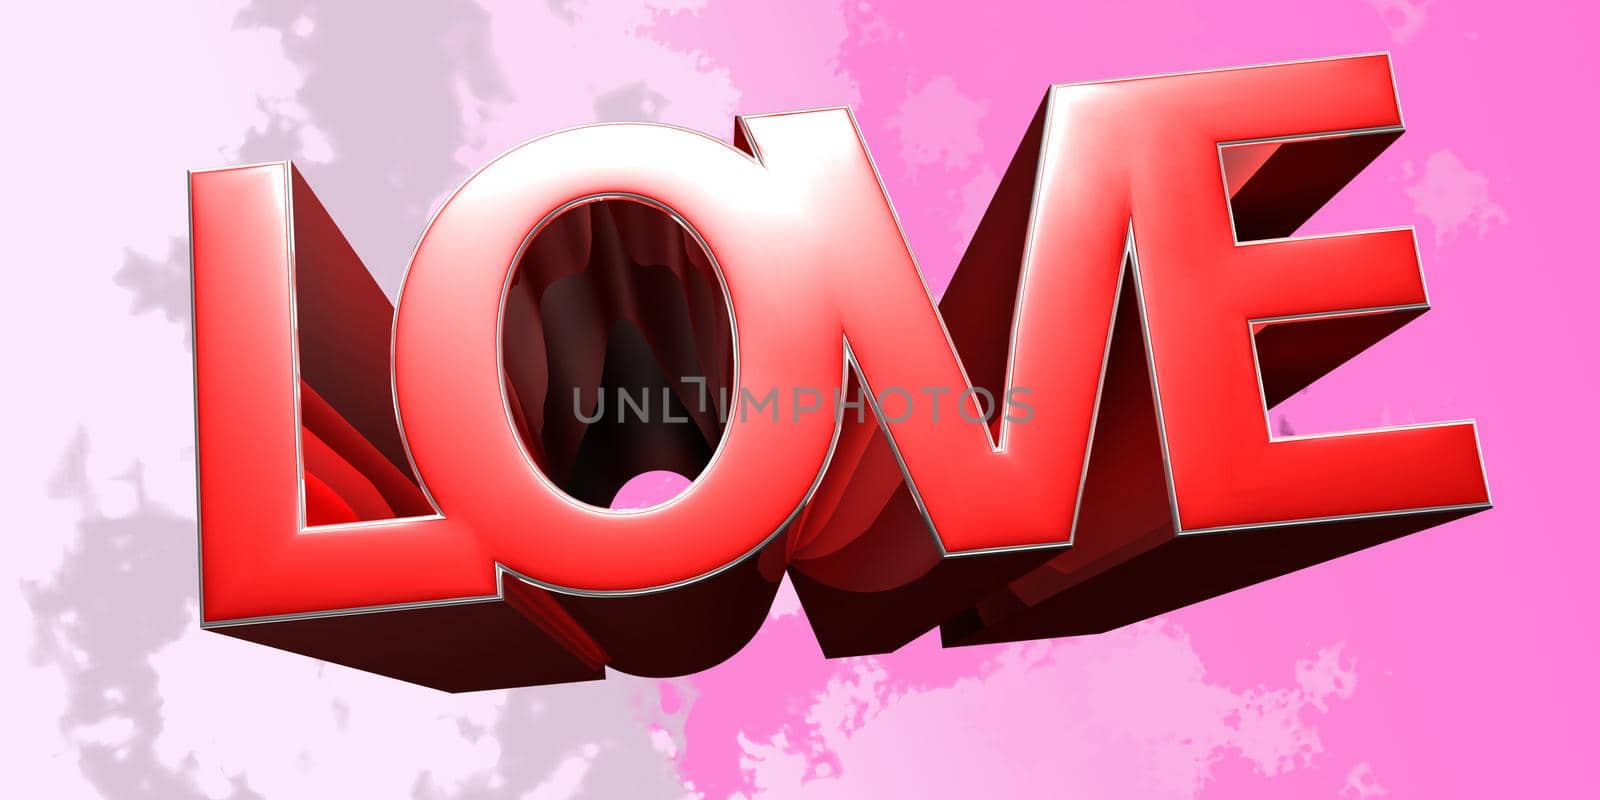 Love on white background illustration 3D rendering with clipping path.